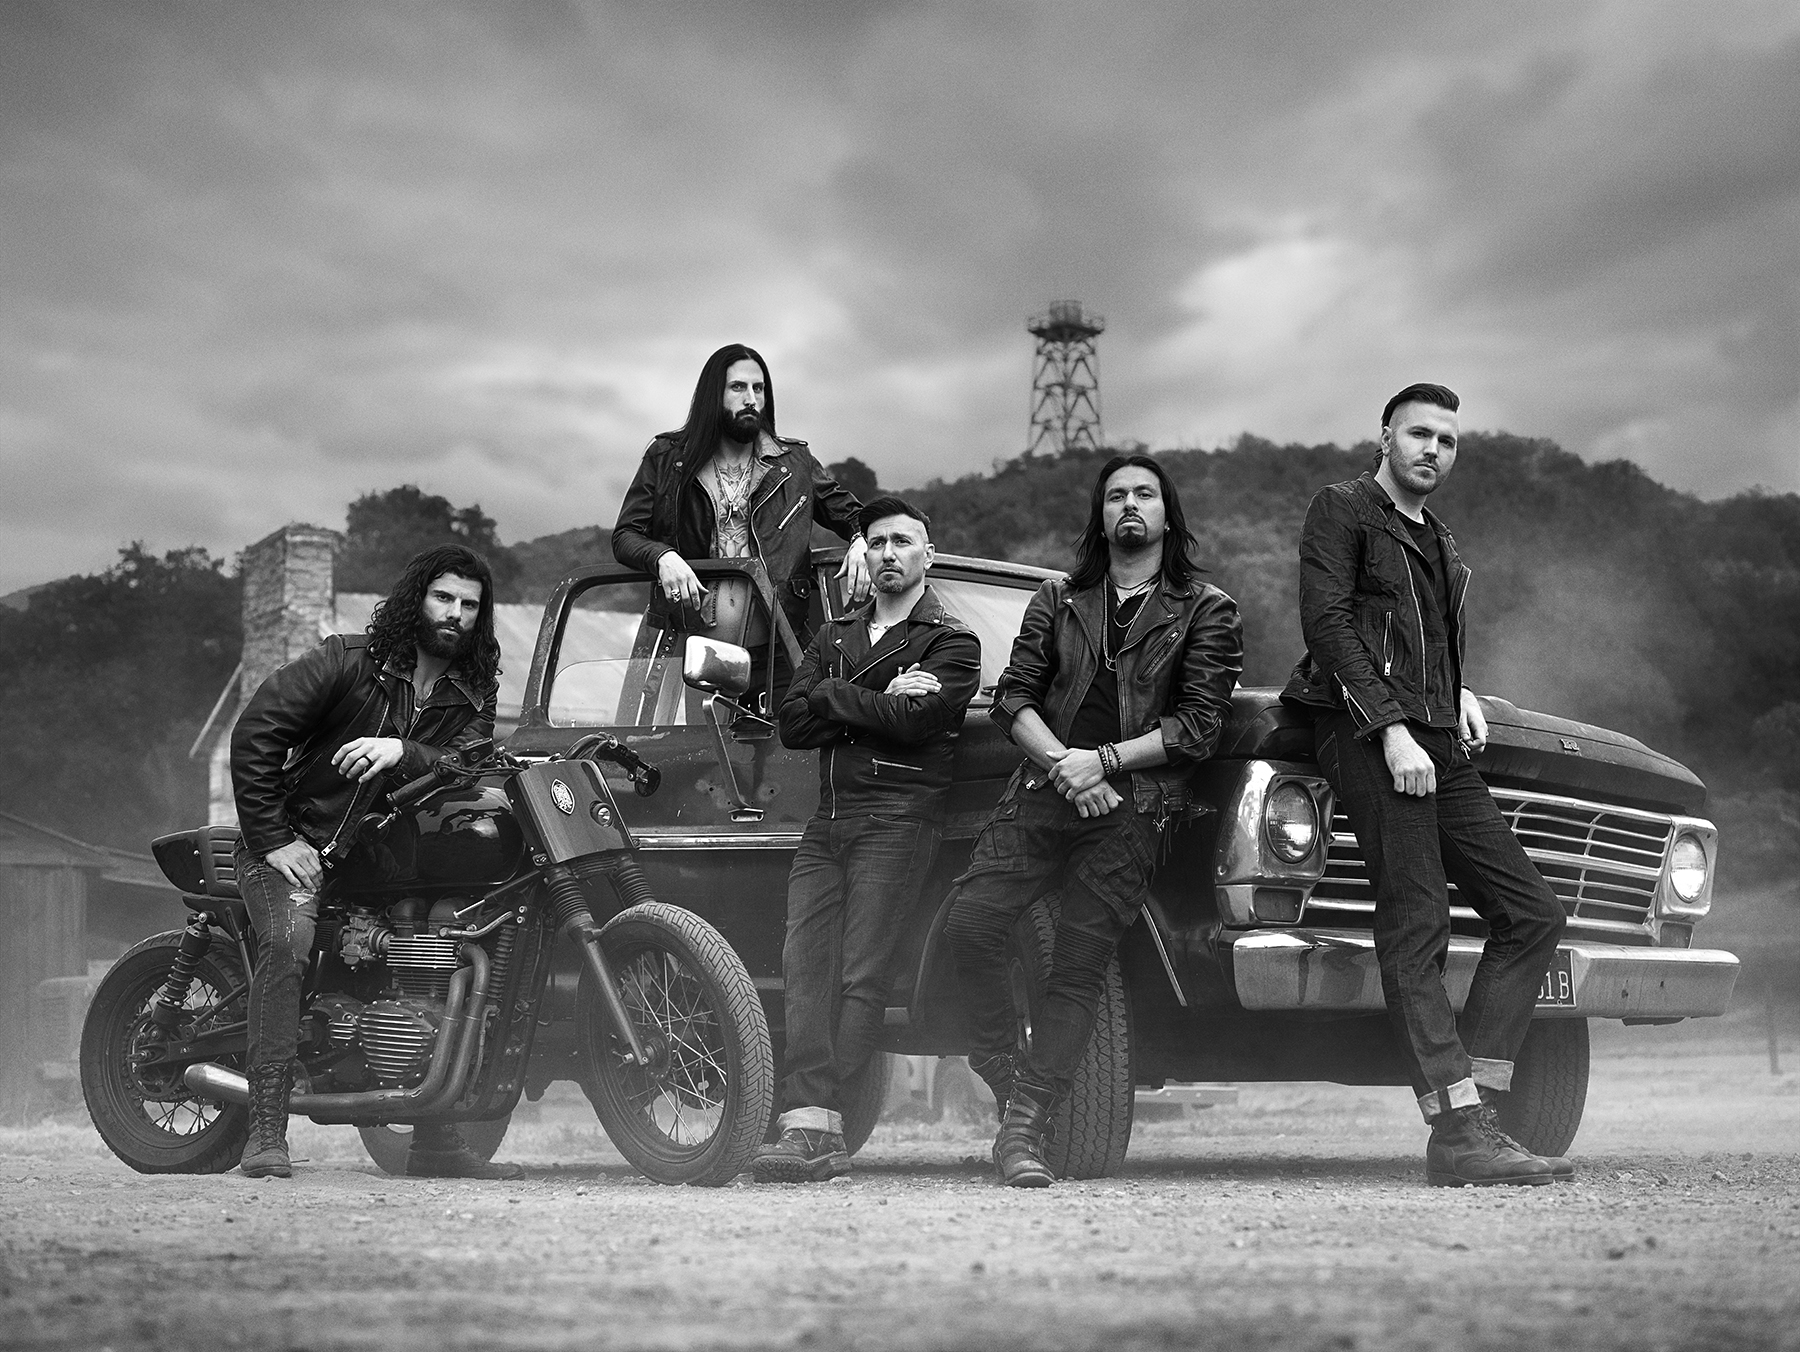 Pop Evil will perform at the Buffalo Chip on Friday, Aug. 12